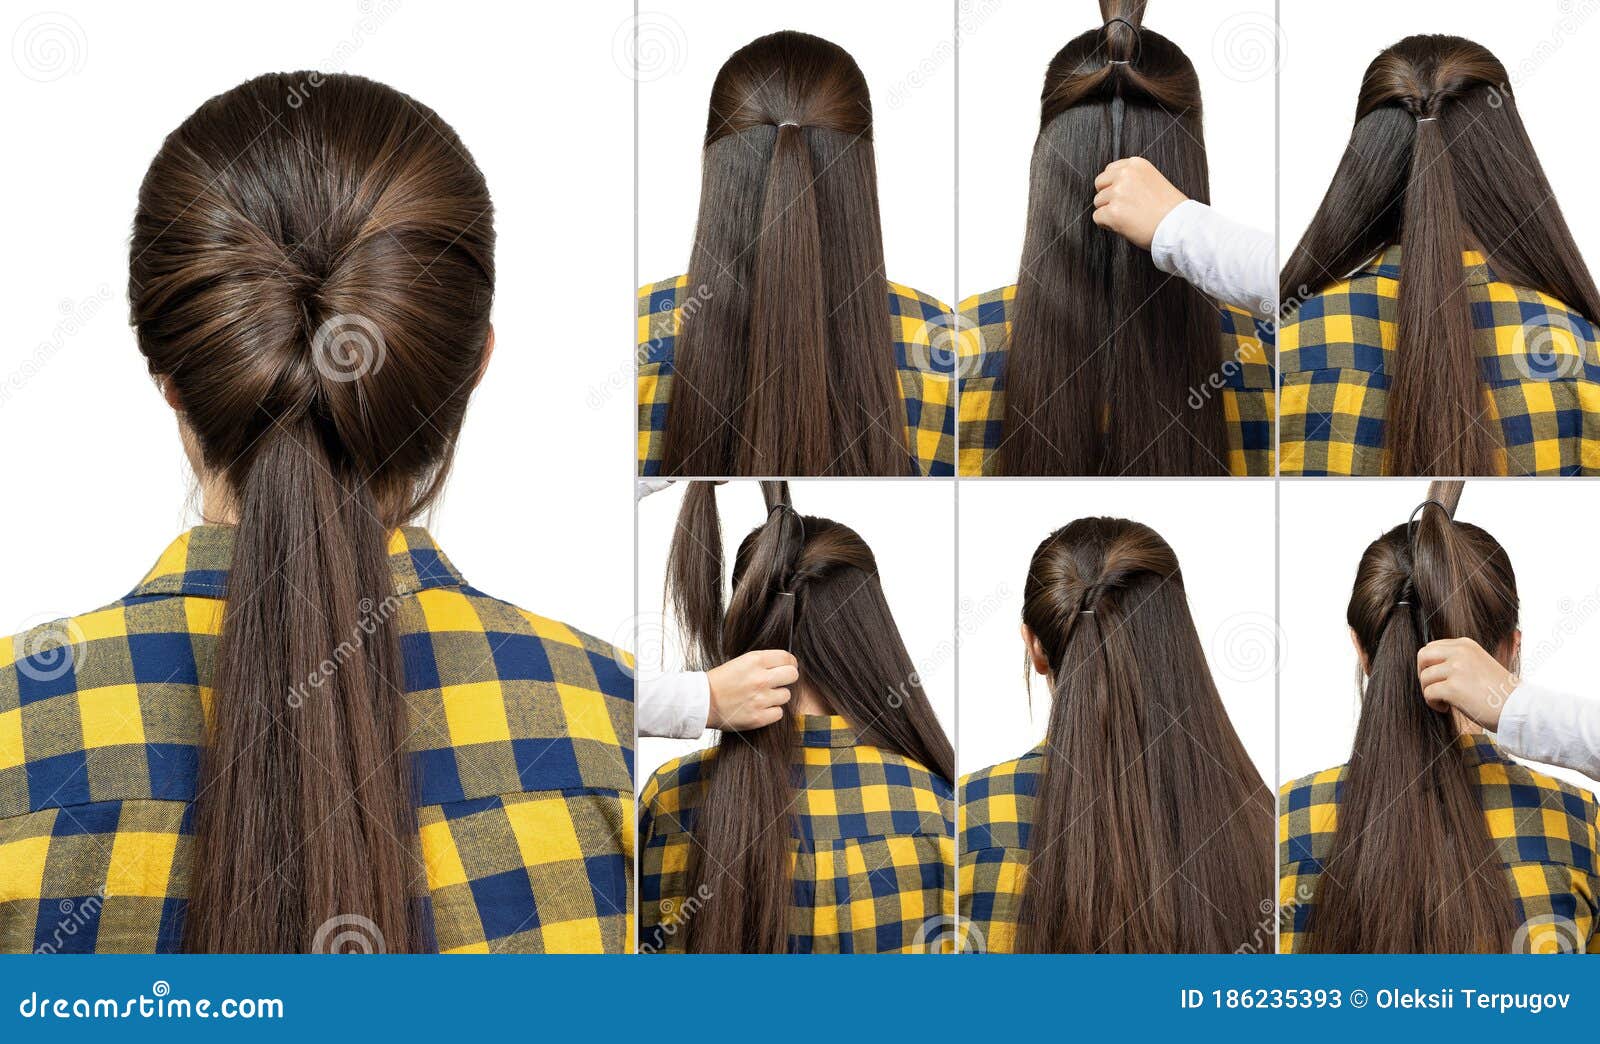 3 Quick And Easy Hair Styles + Step-by-Step Tutorials | Easy hairstyles for  long hair, Thick hair styles, Easy hairstyles